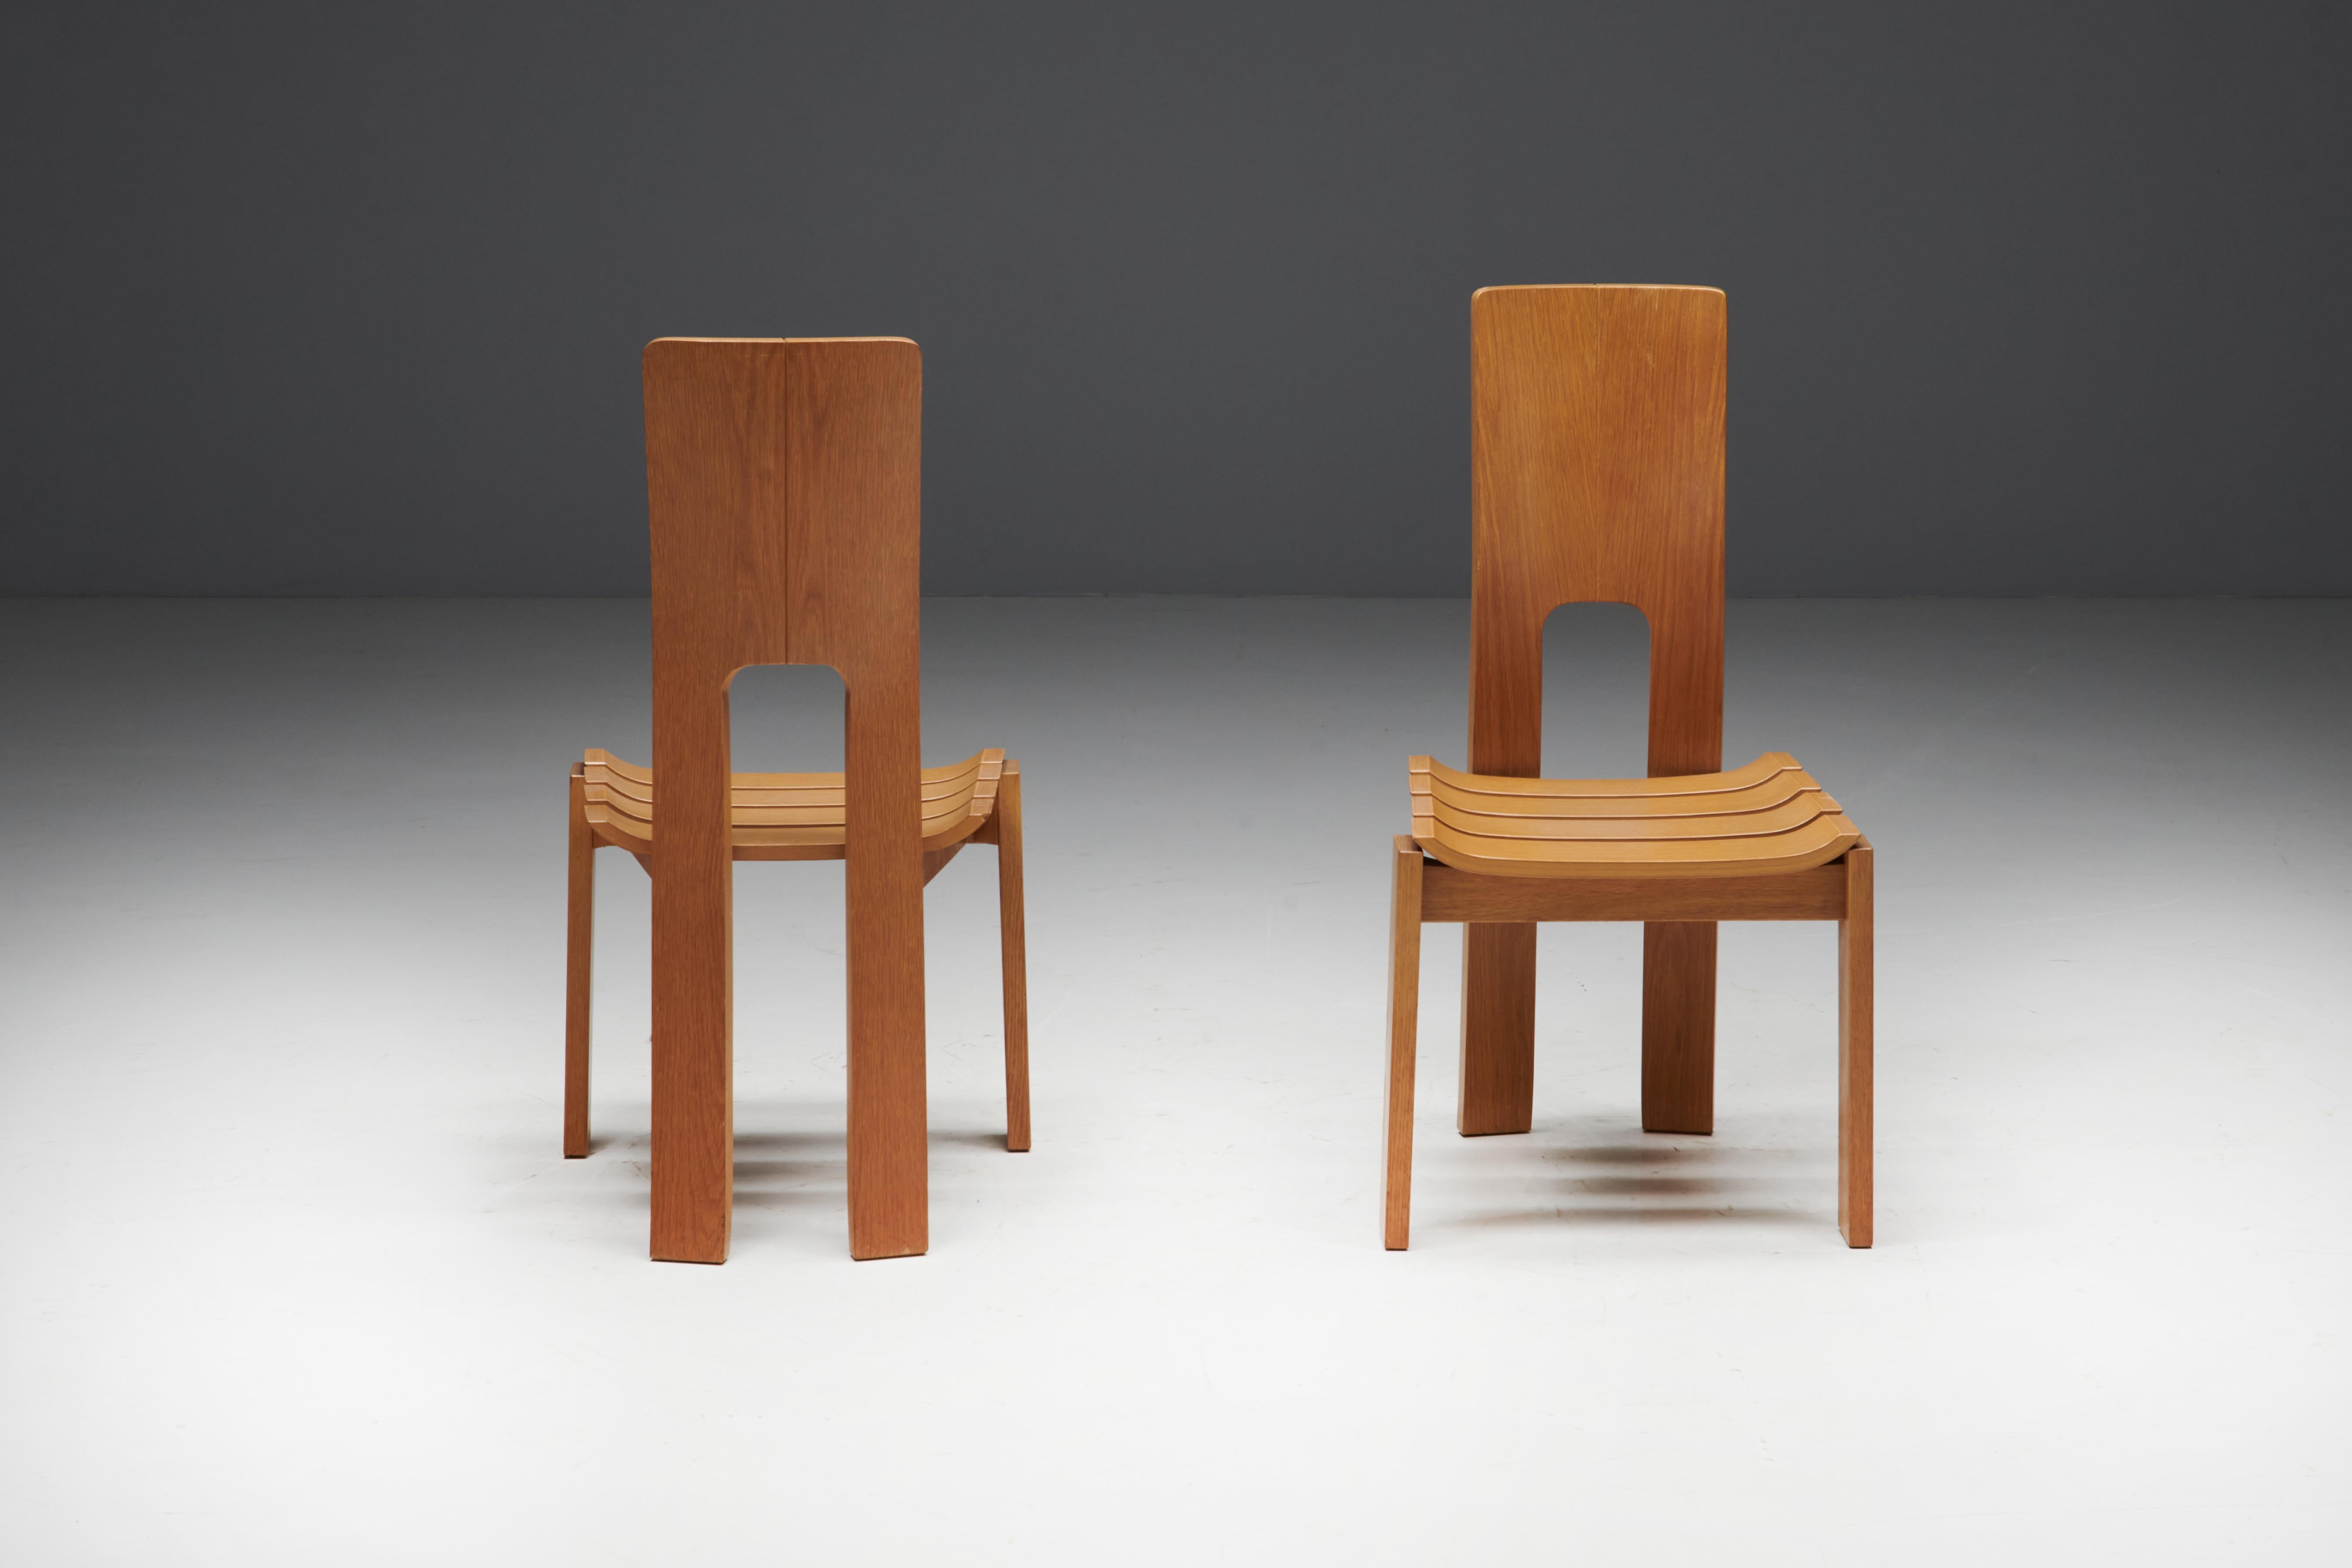 Scandinavian Modern Plywood Dining Chairs, 1970s For Sale 1